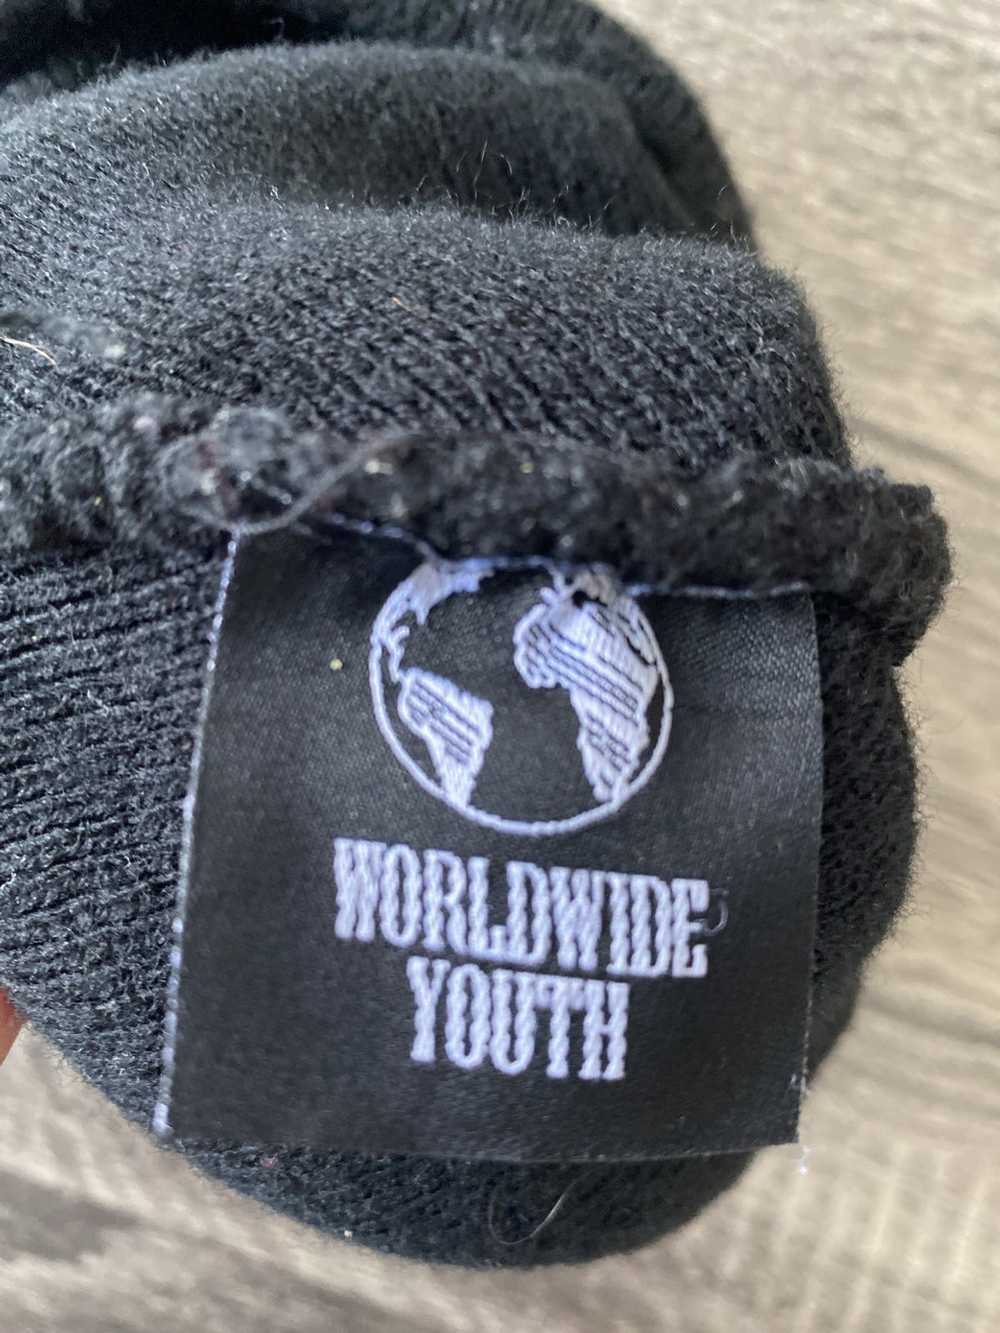 Worldwide Youth World wide youth beanie 1st colle… - image 2